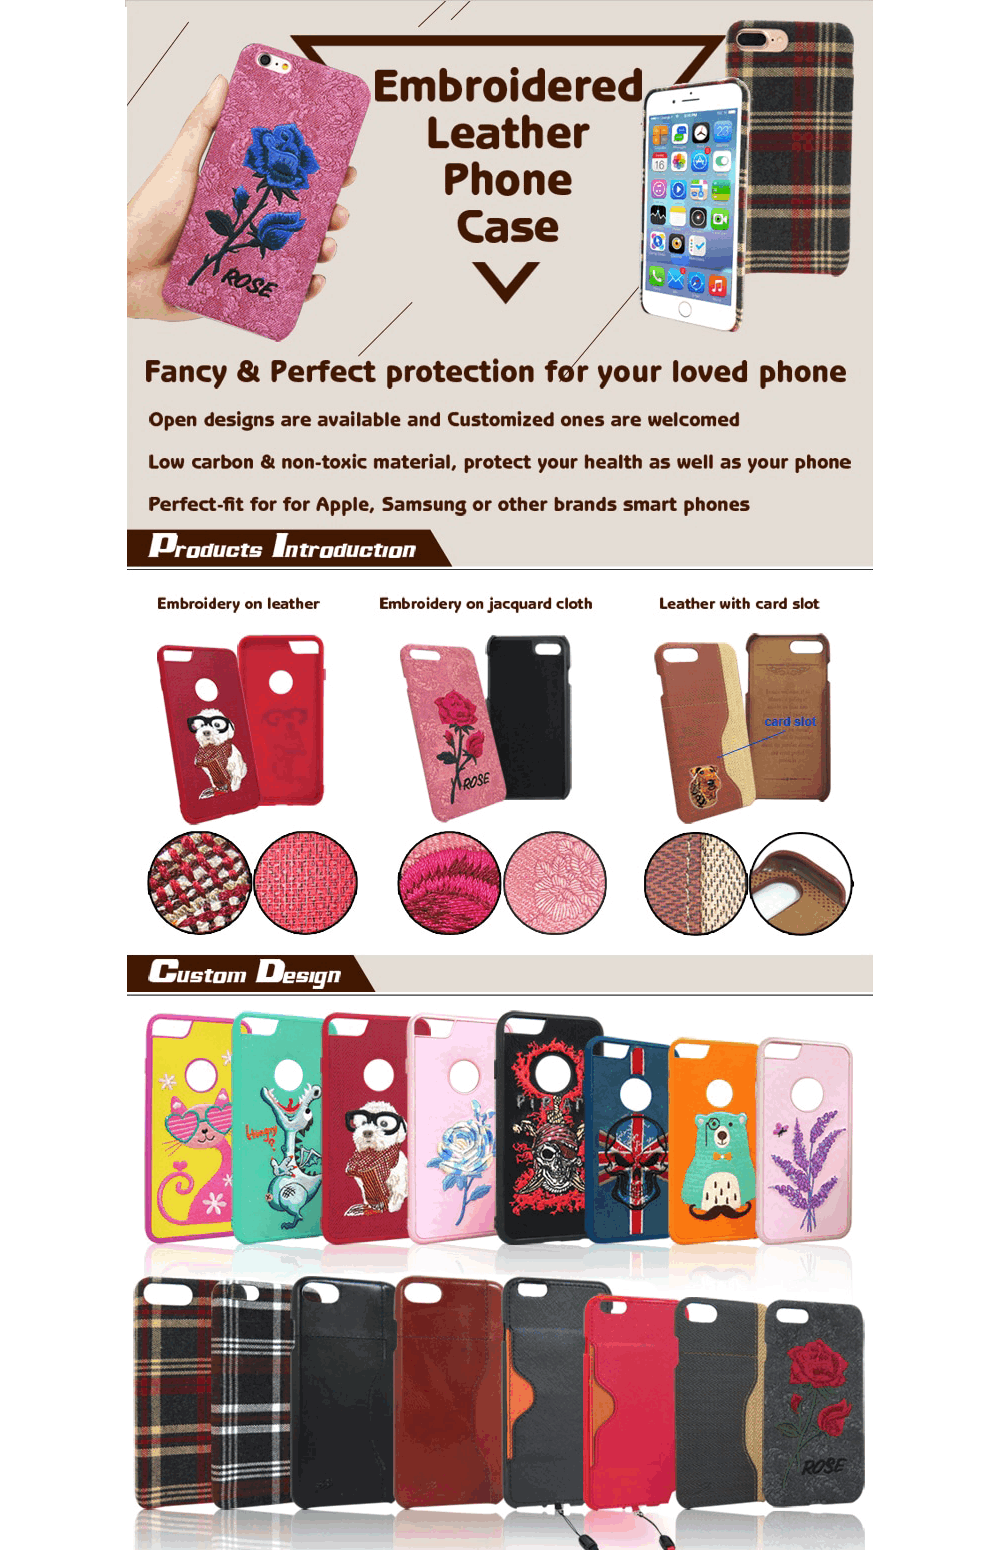 custom embroidered phone cases